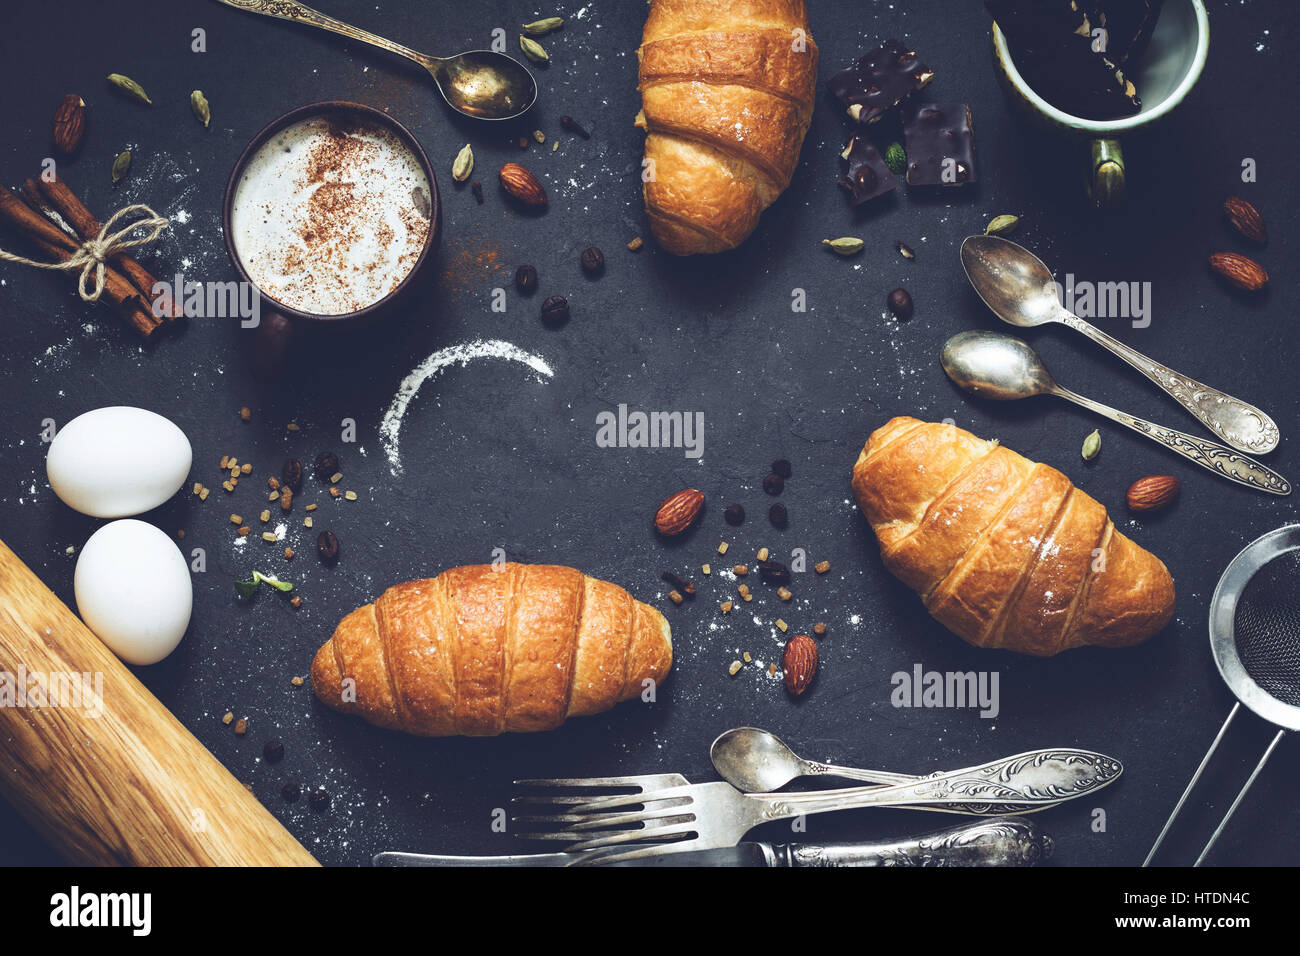 Coffee, croissants, chocolate, spices, nuts and vintage cutlery. Flat lay composition of sweet breakfast food on dark stone background with copy space Stock Photo